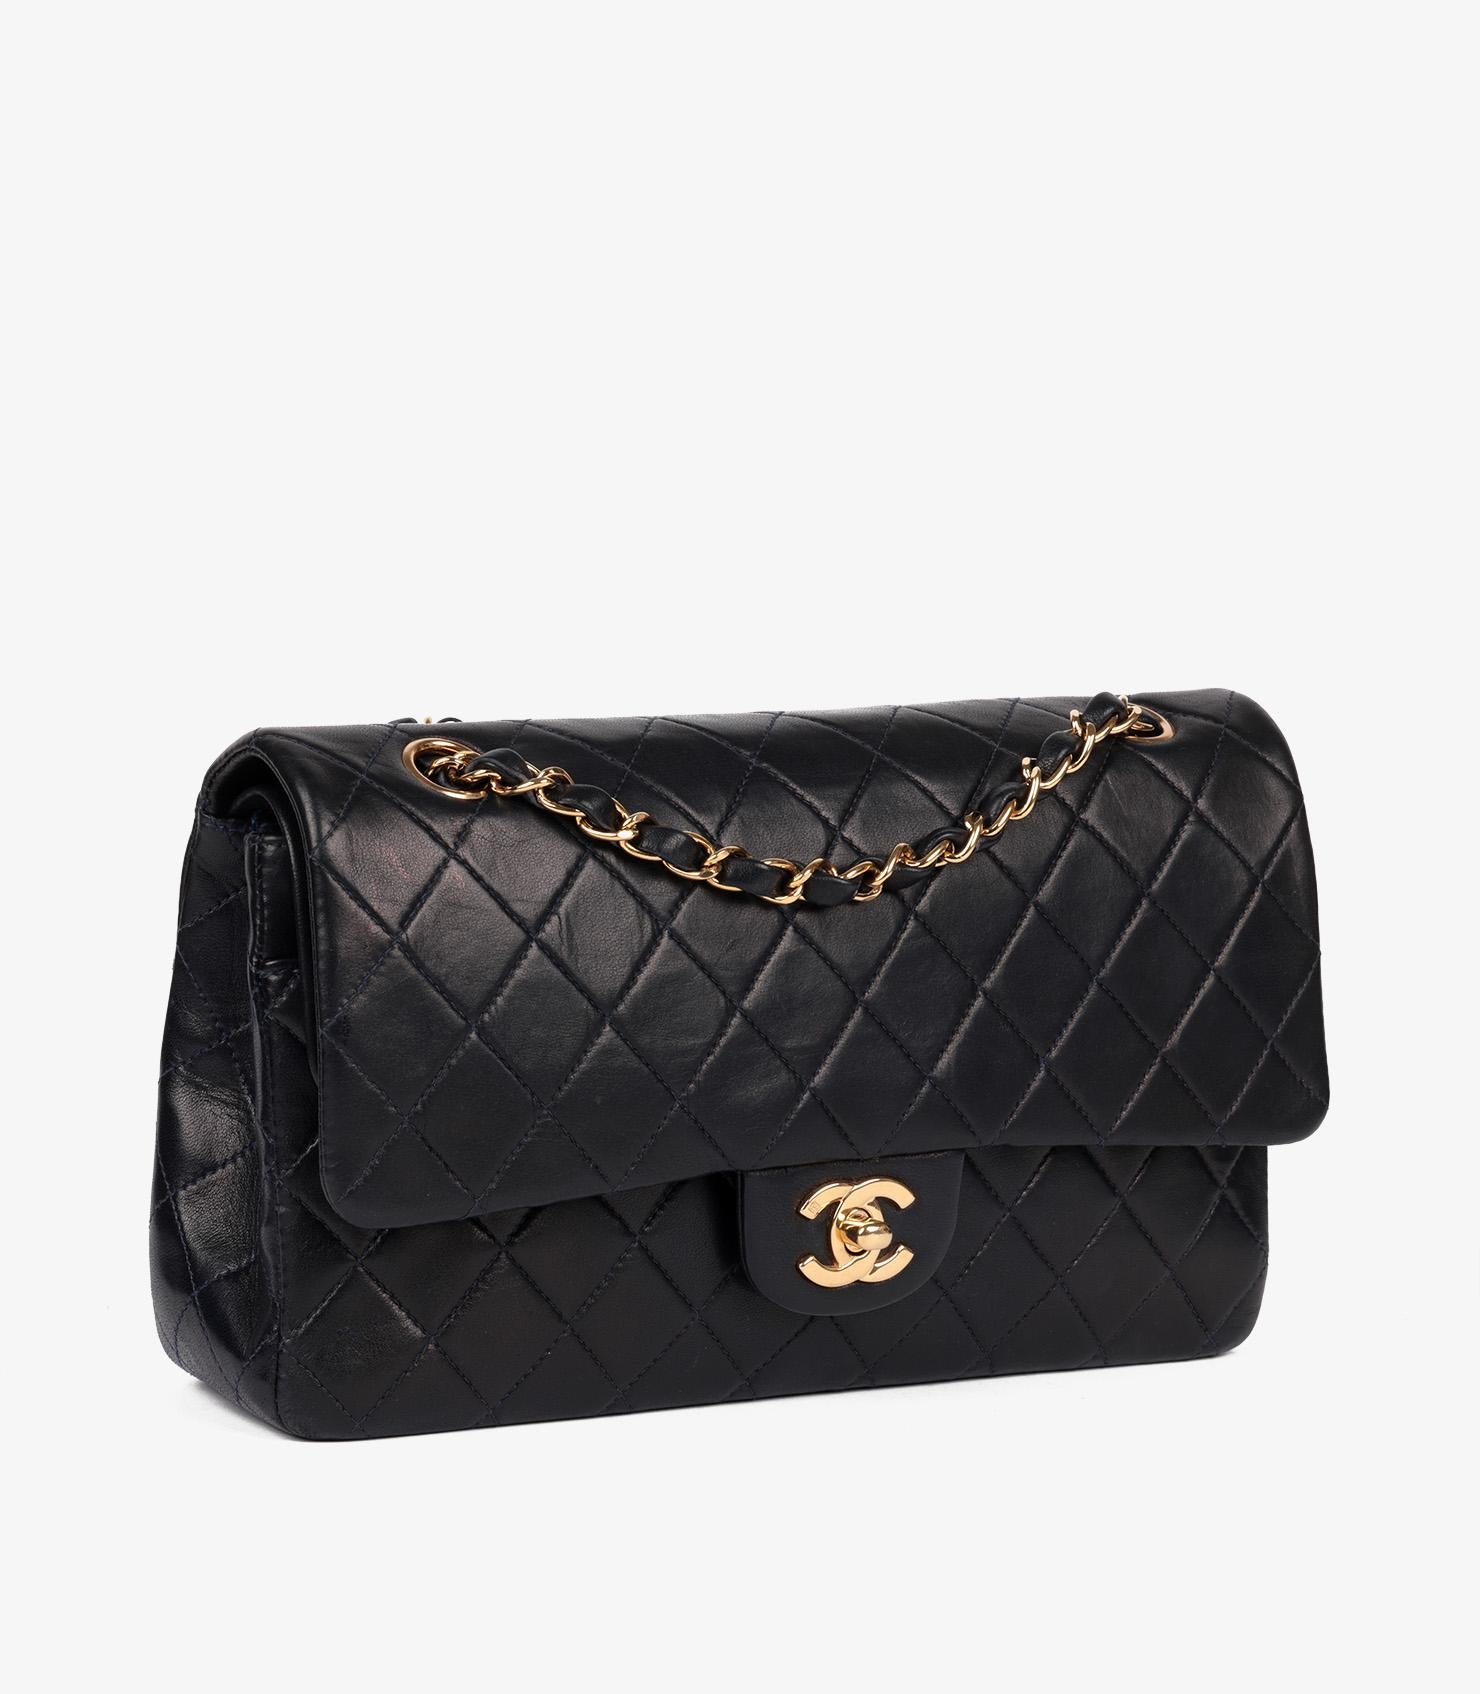 Chanel Navy Quilted Lambskin Vintage Medium Classic Double Flap Bag In Excellent Condition For Sale In Bishop's Stortford, Hertfordshire